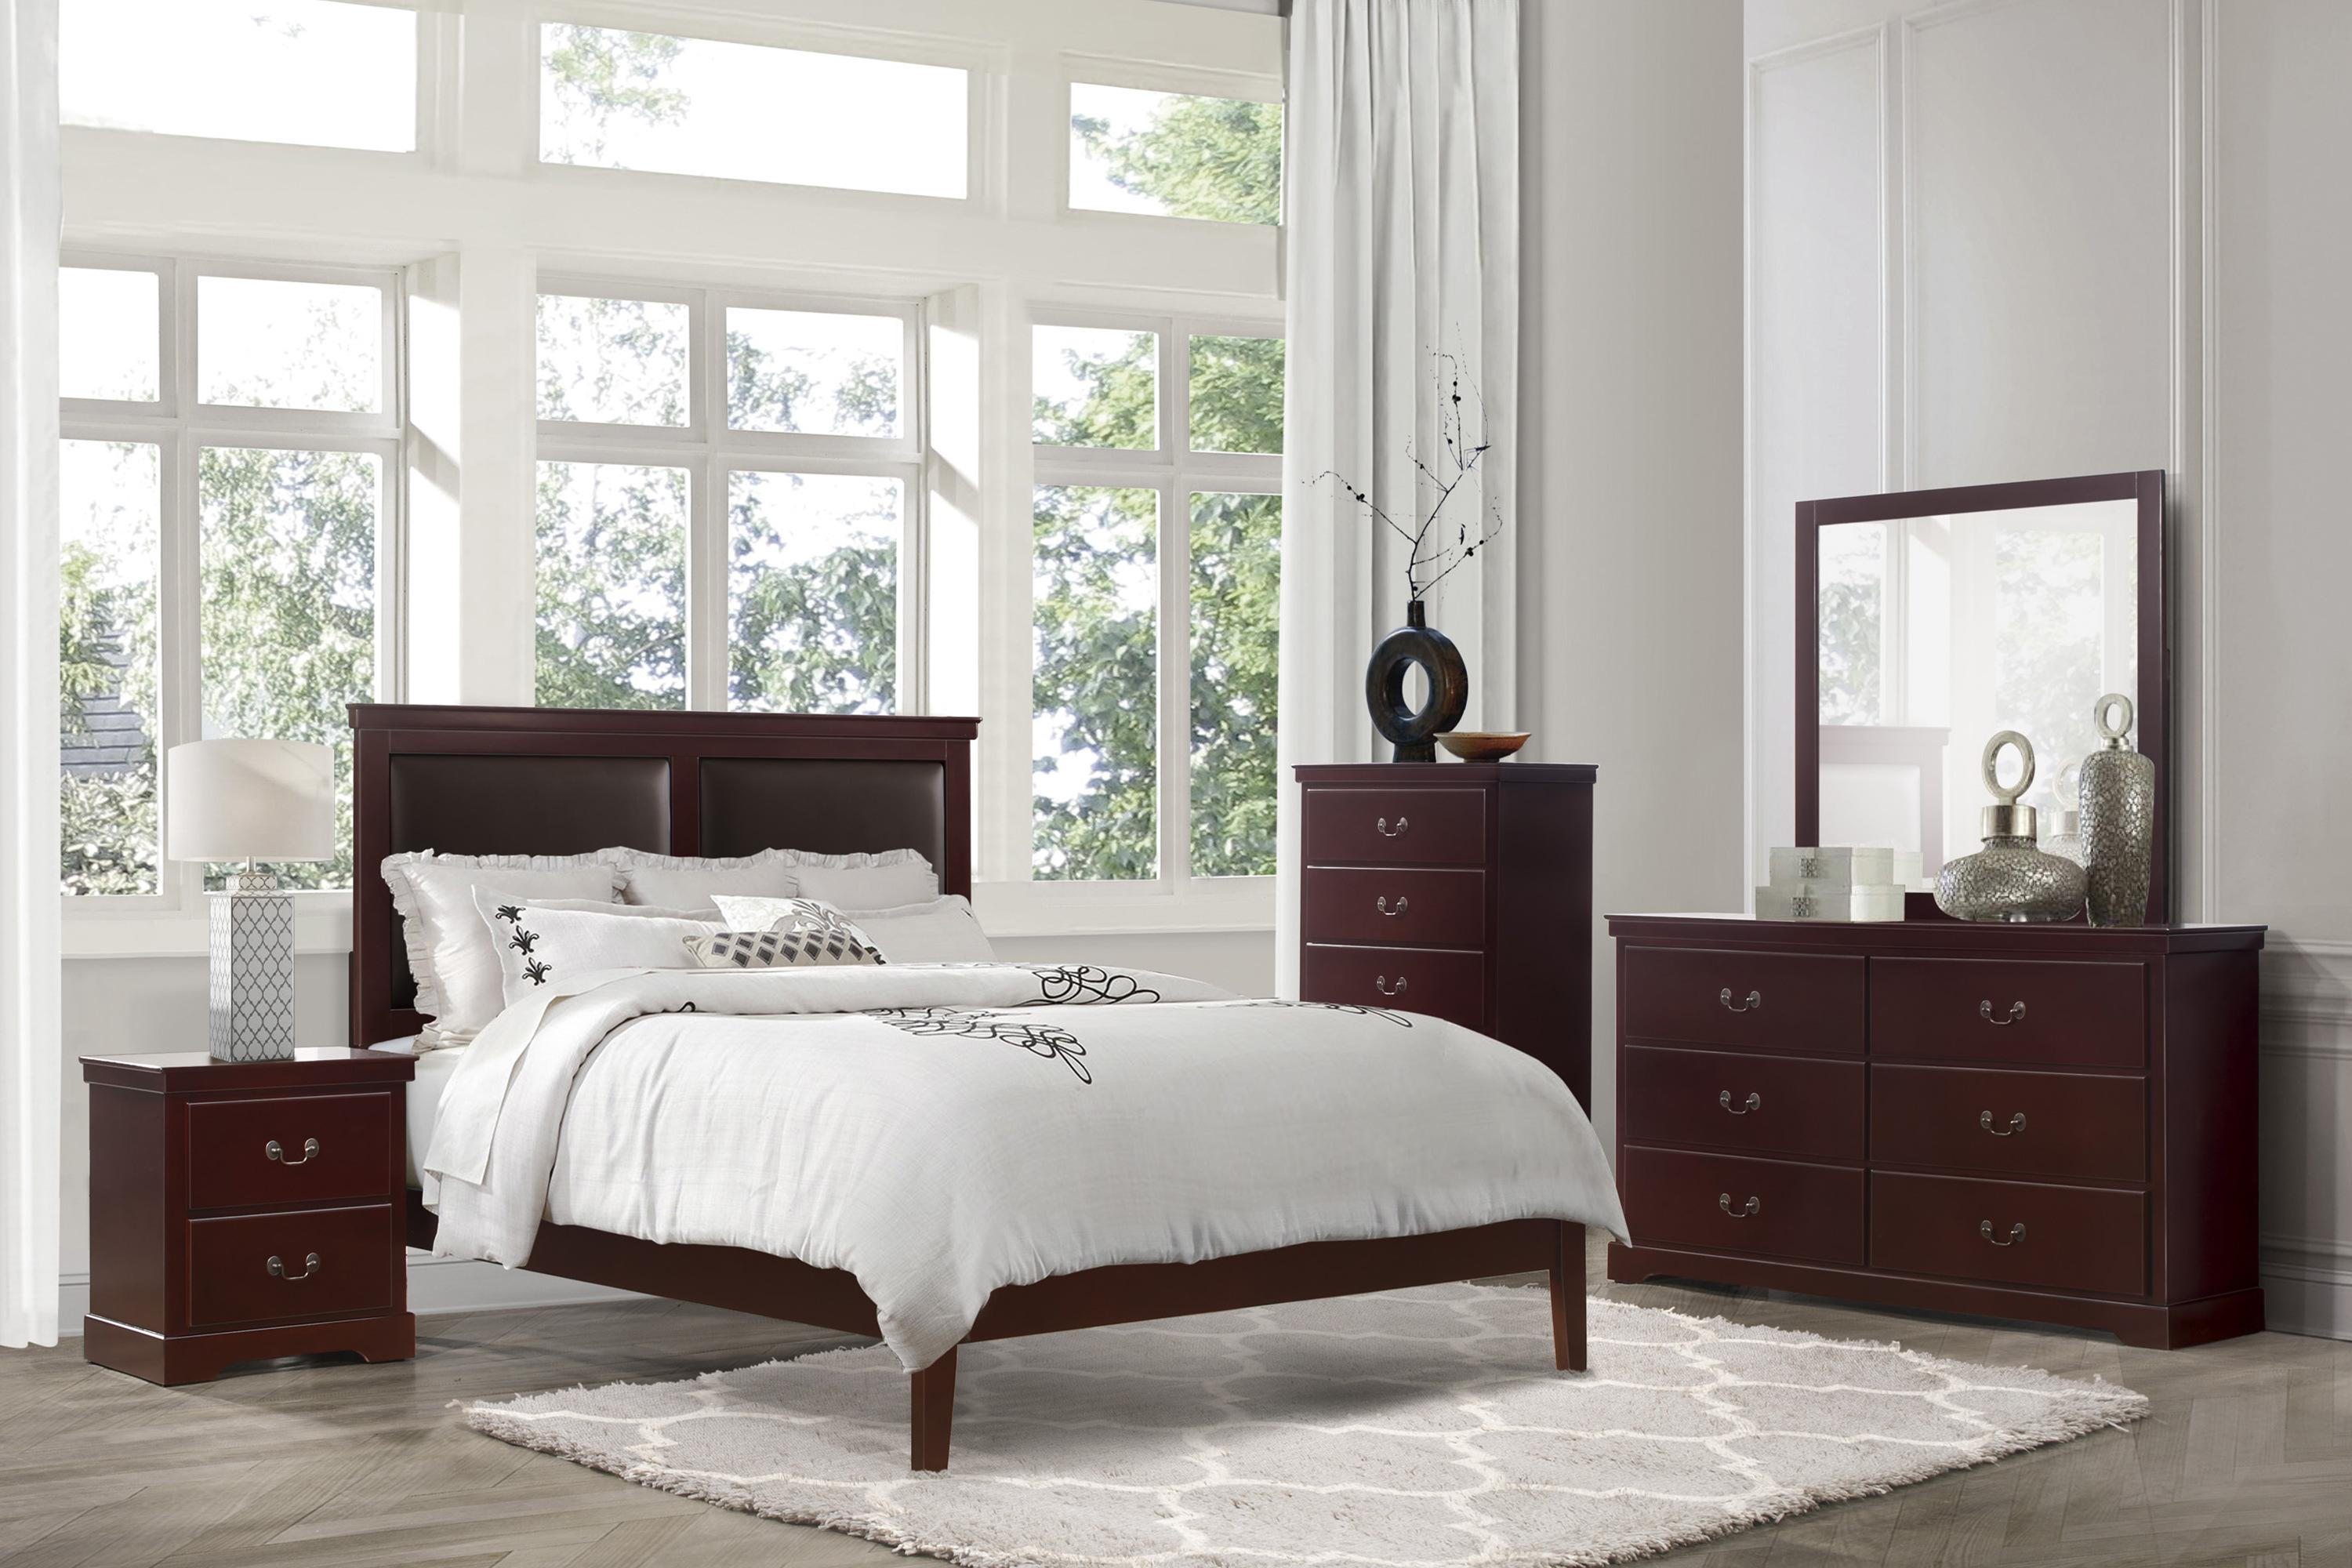 Modern Bedroom Set 1519CH-1-6PC Seabright 1519CH-1-6PC in Cherry Faux Leather